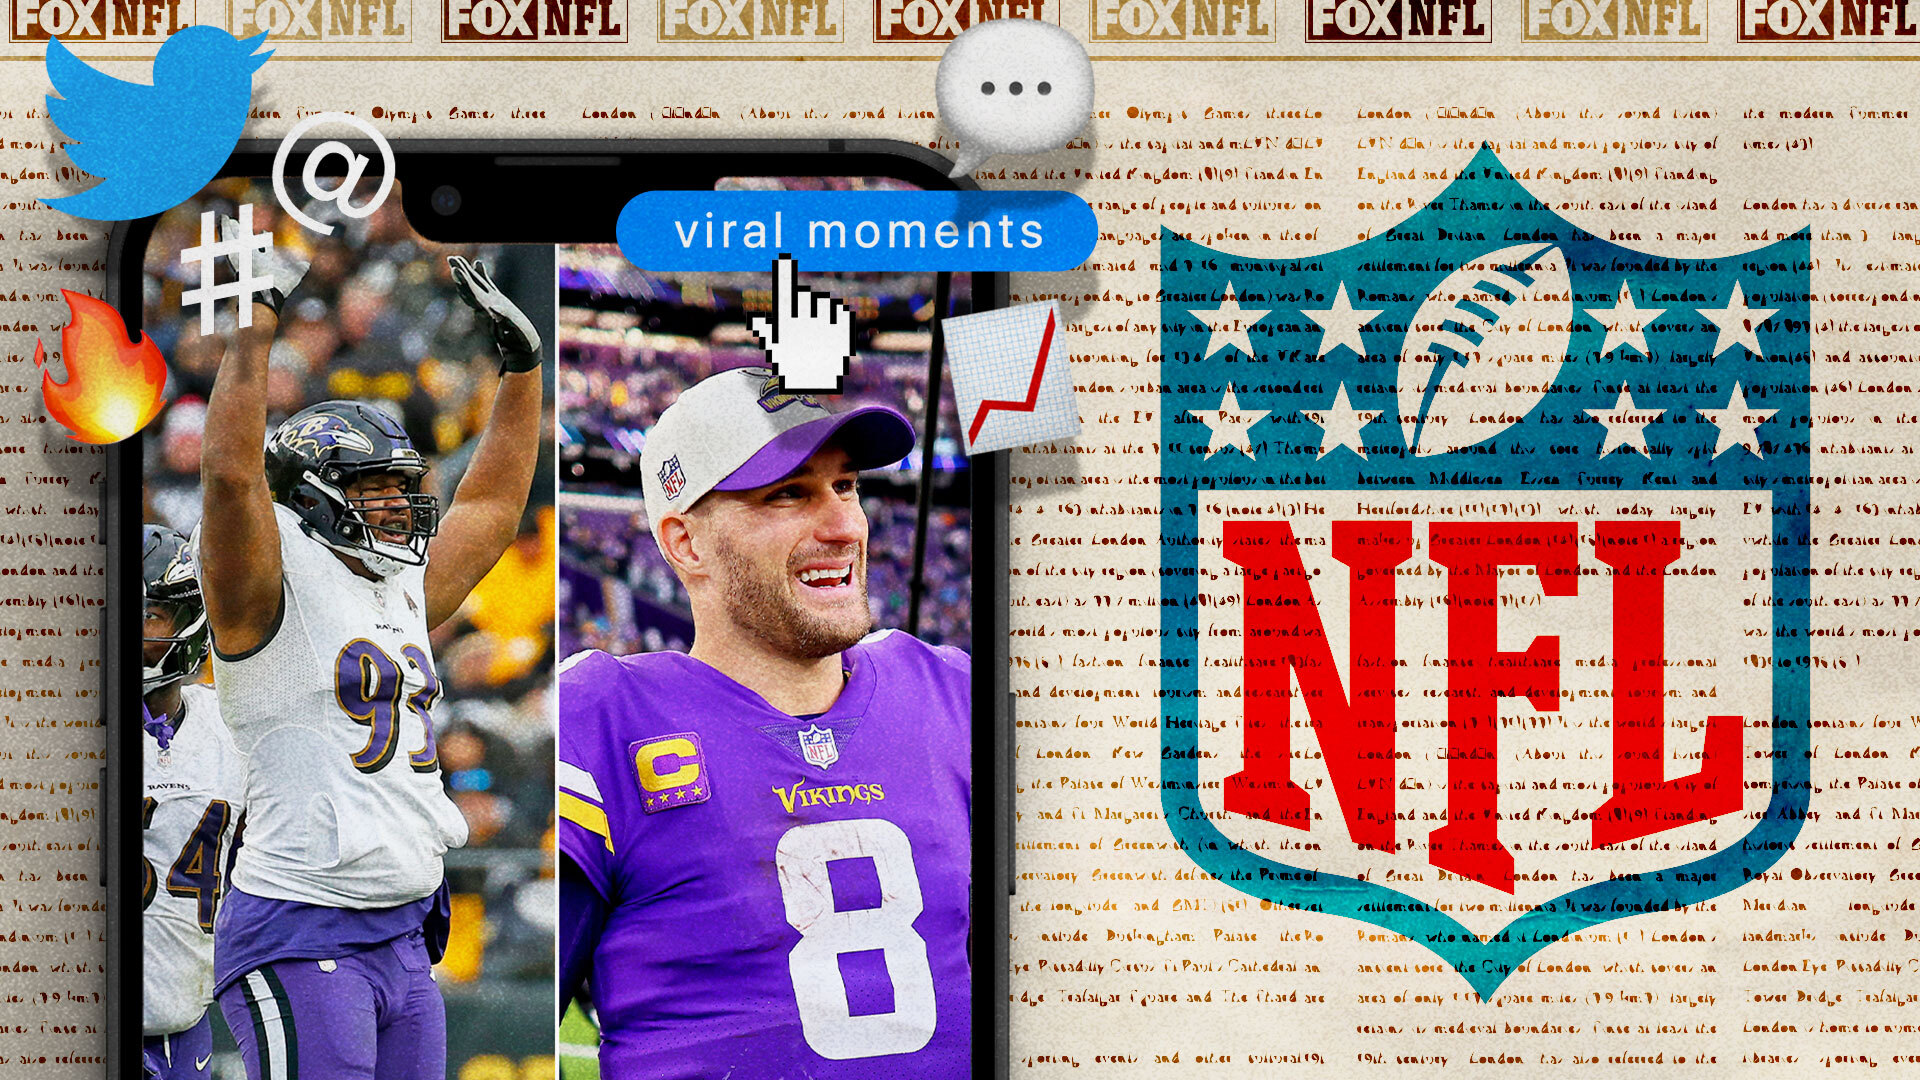 NFL Week 15: Top viral moments from Colts-Vikings, Ravens-Browns, Bills-Dolphins